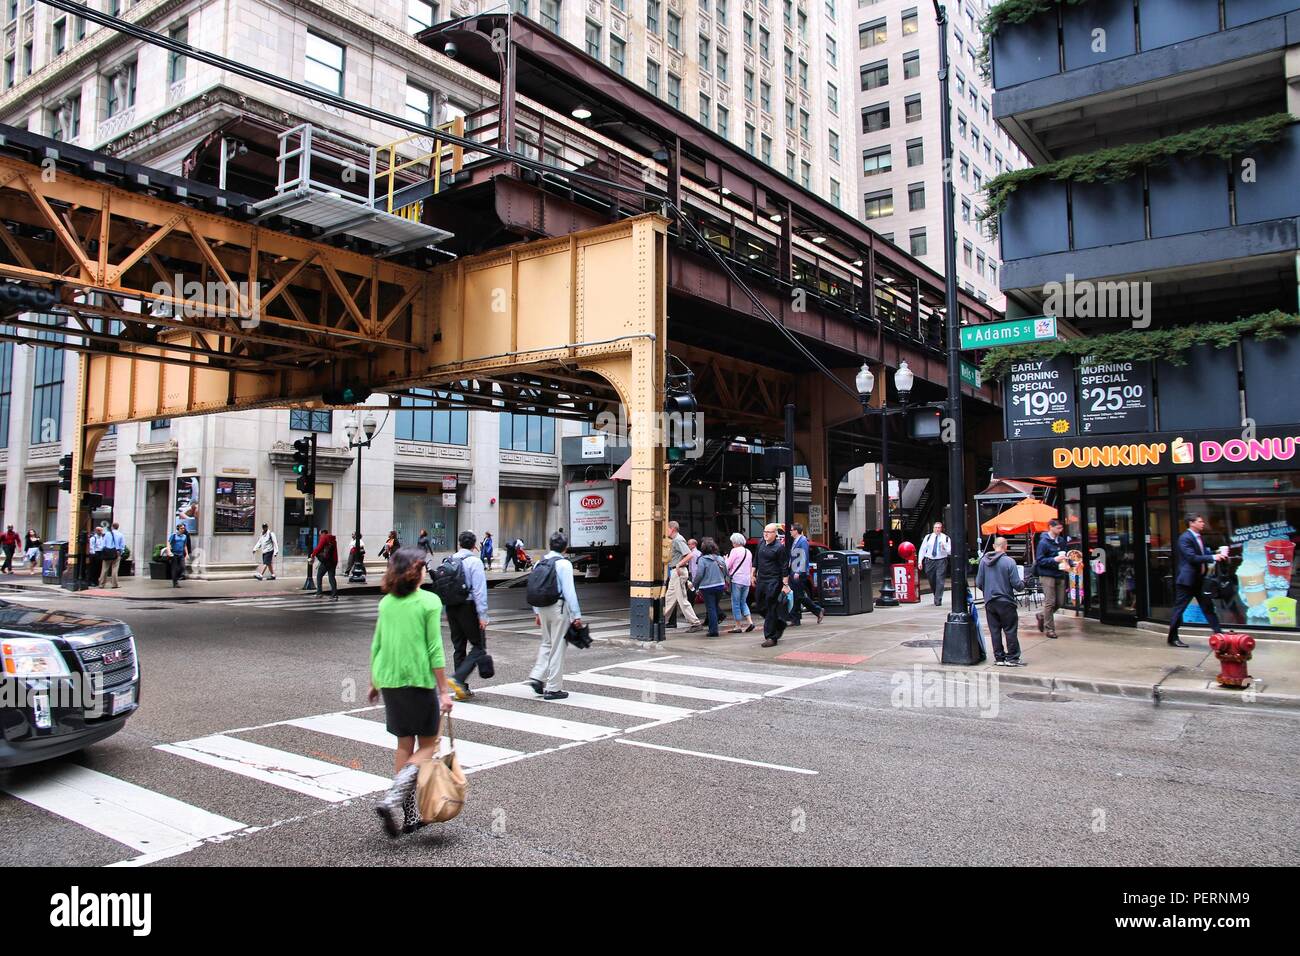 CHICAGO, USA - JUNE 26, 2013: People walk downtown in Chicago. Chicago is the 3rd most populous US city with 2.7 million residents (8.7 million in its Stock Photo